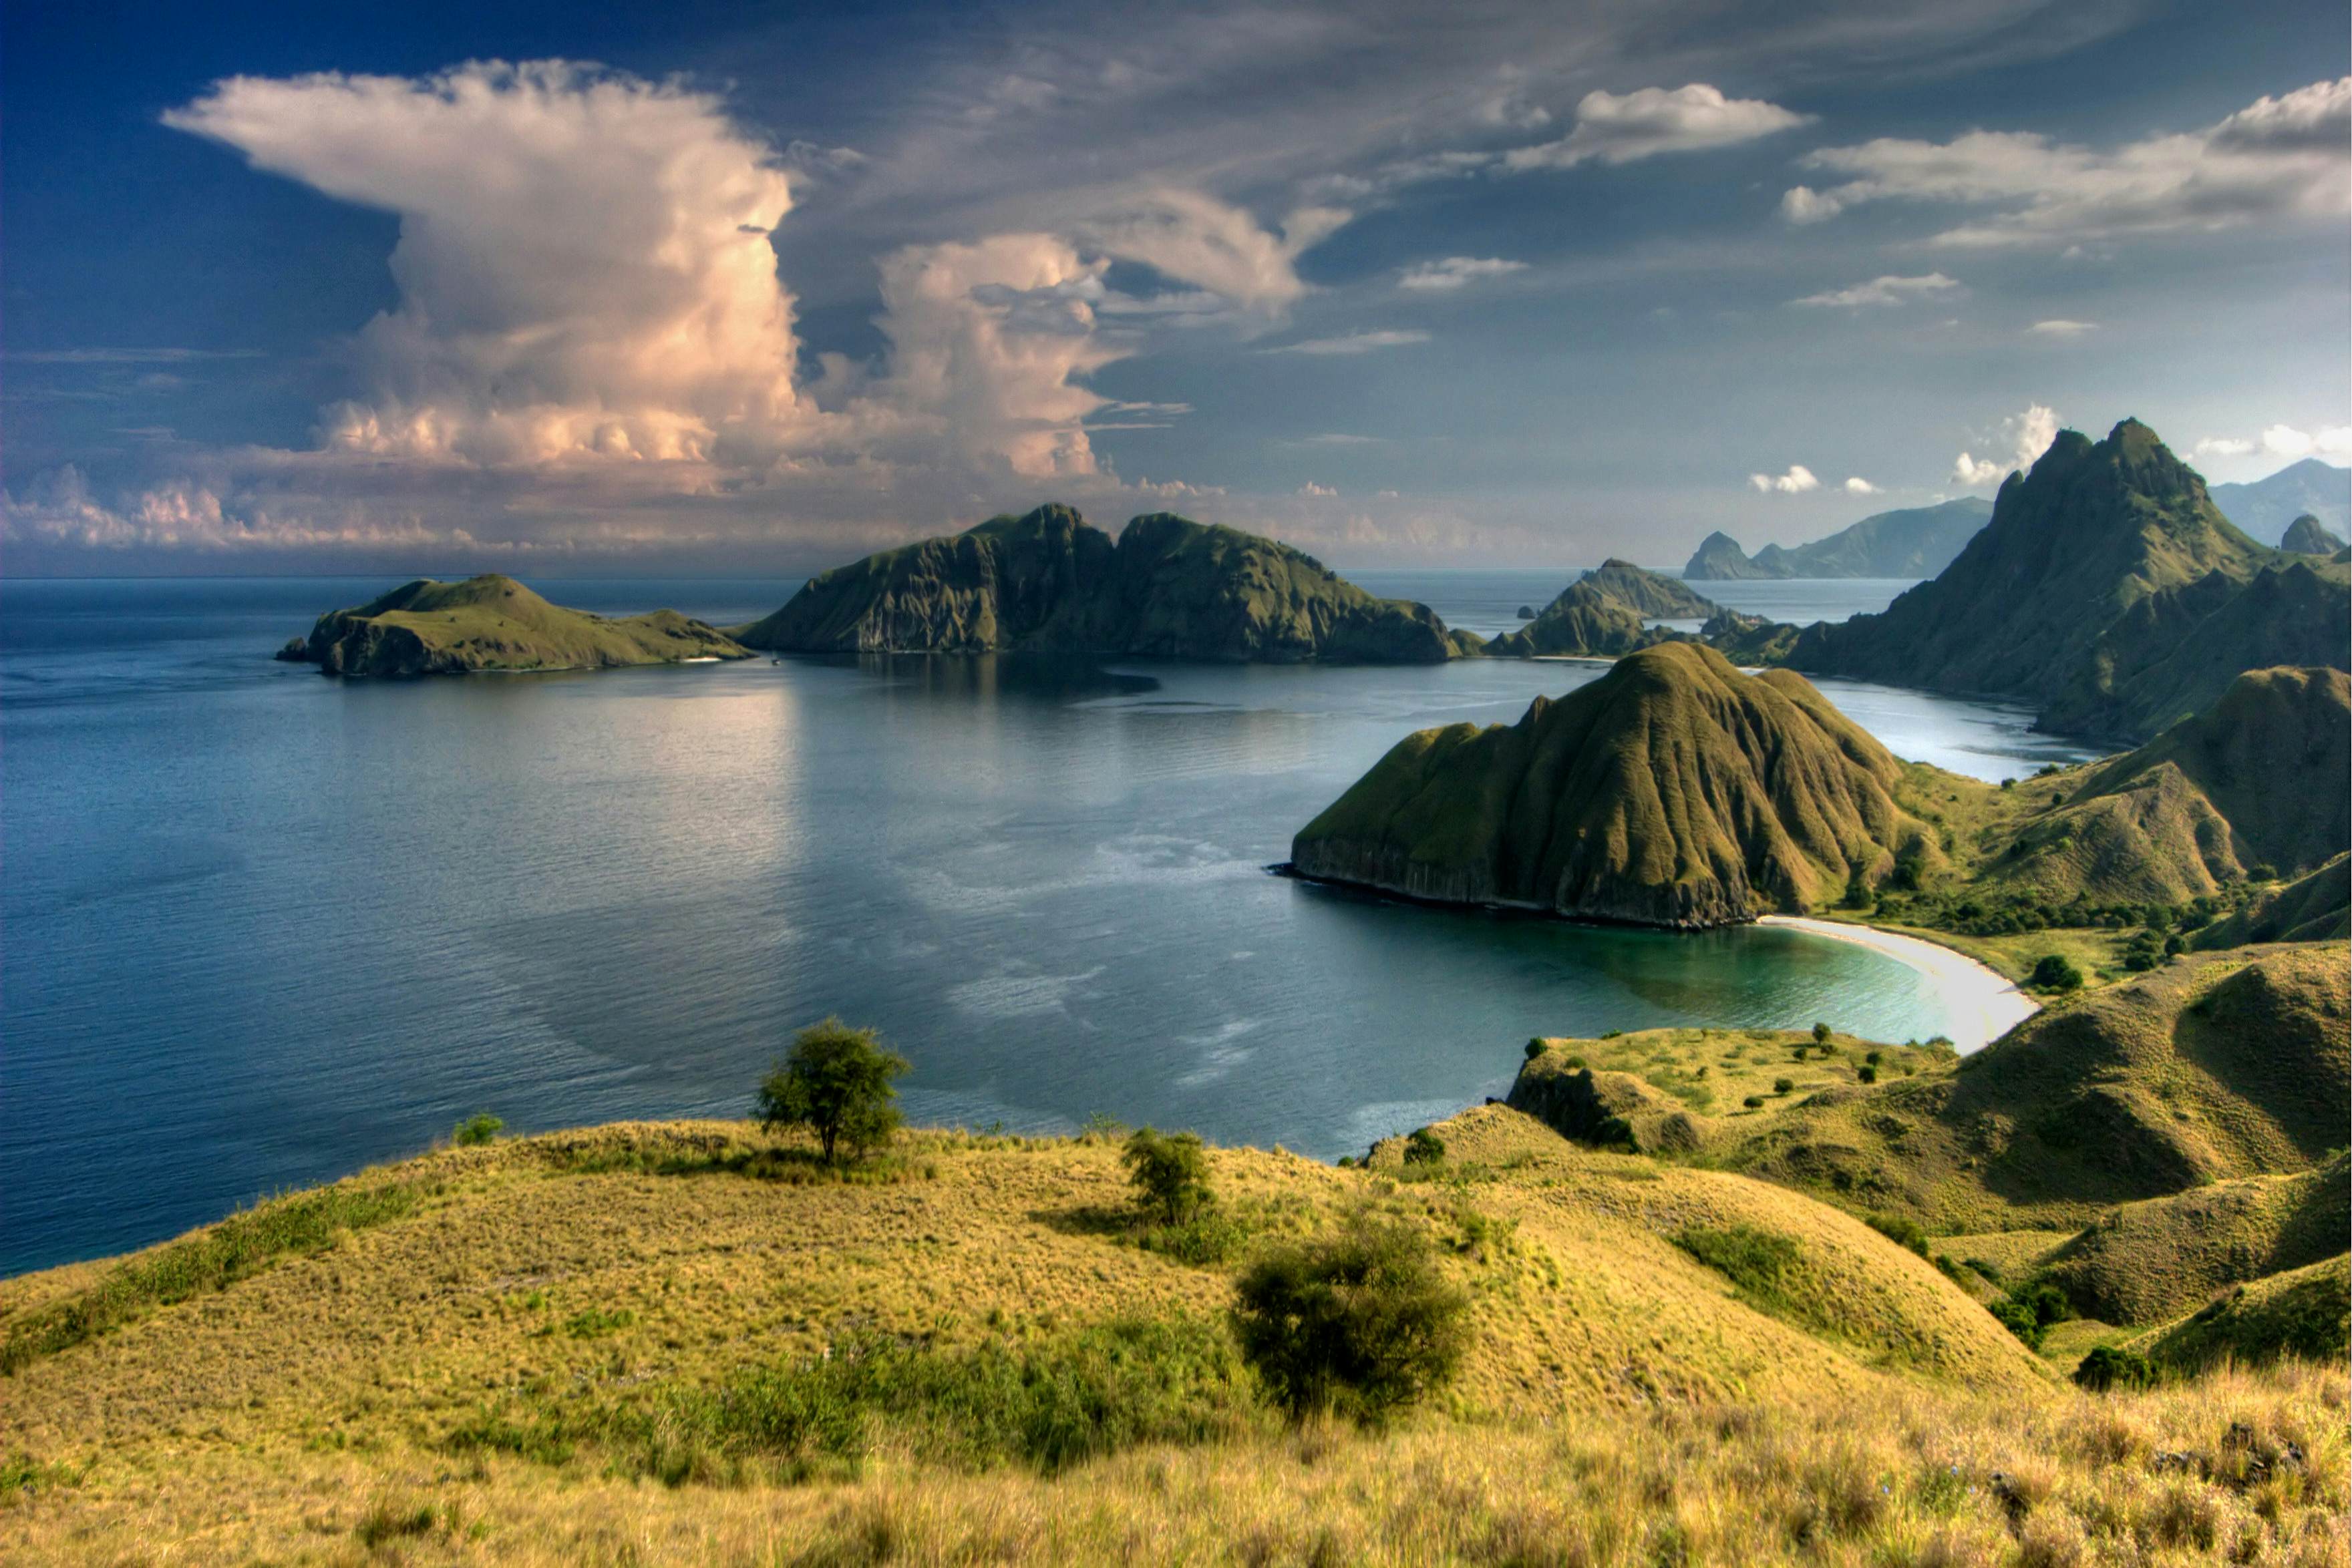 Indonesia Travel Stories - Lonely Planet